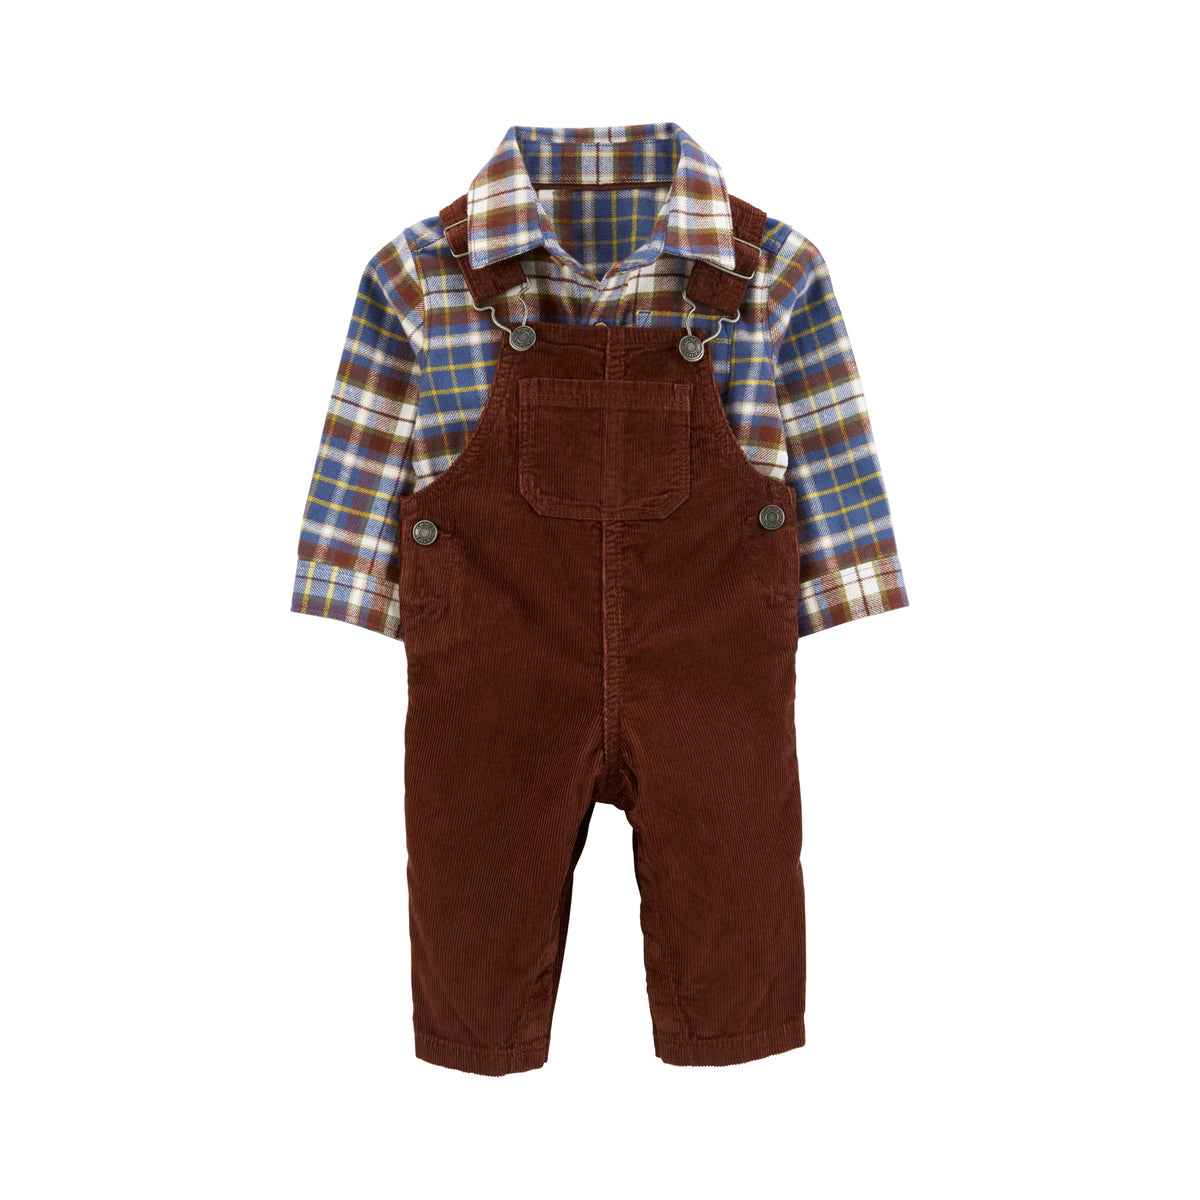 Carter's casual country style 2-piece set (6M-24M)